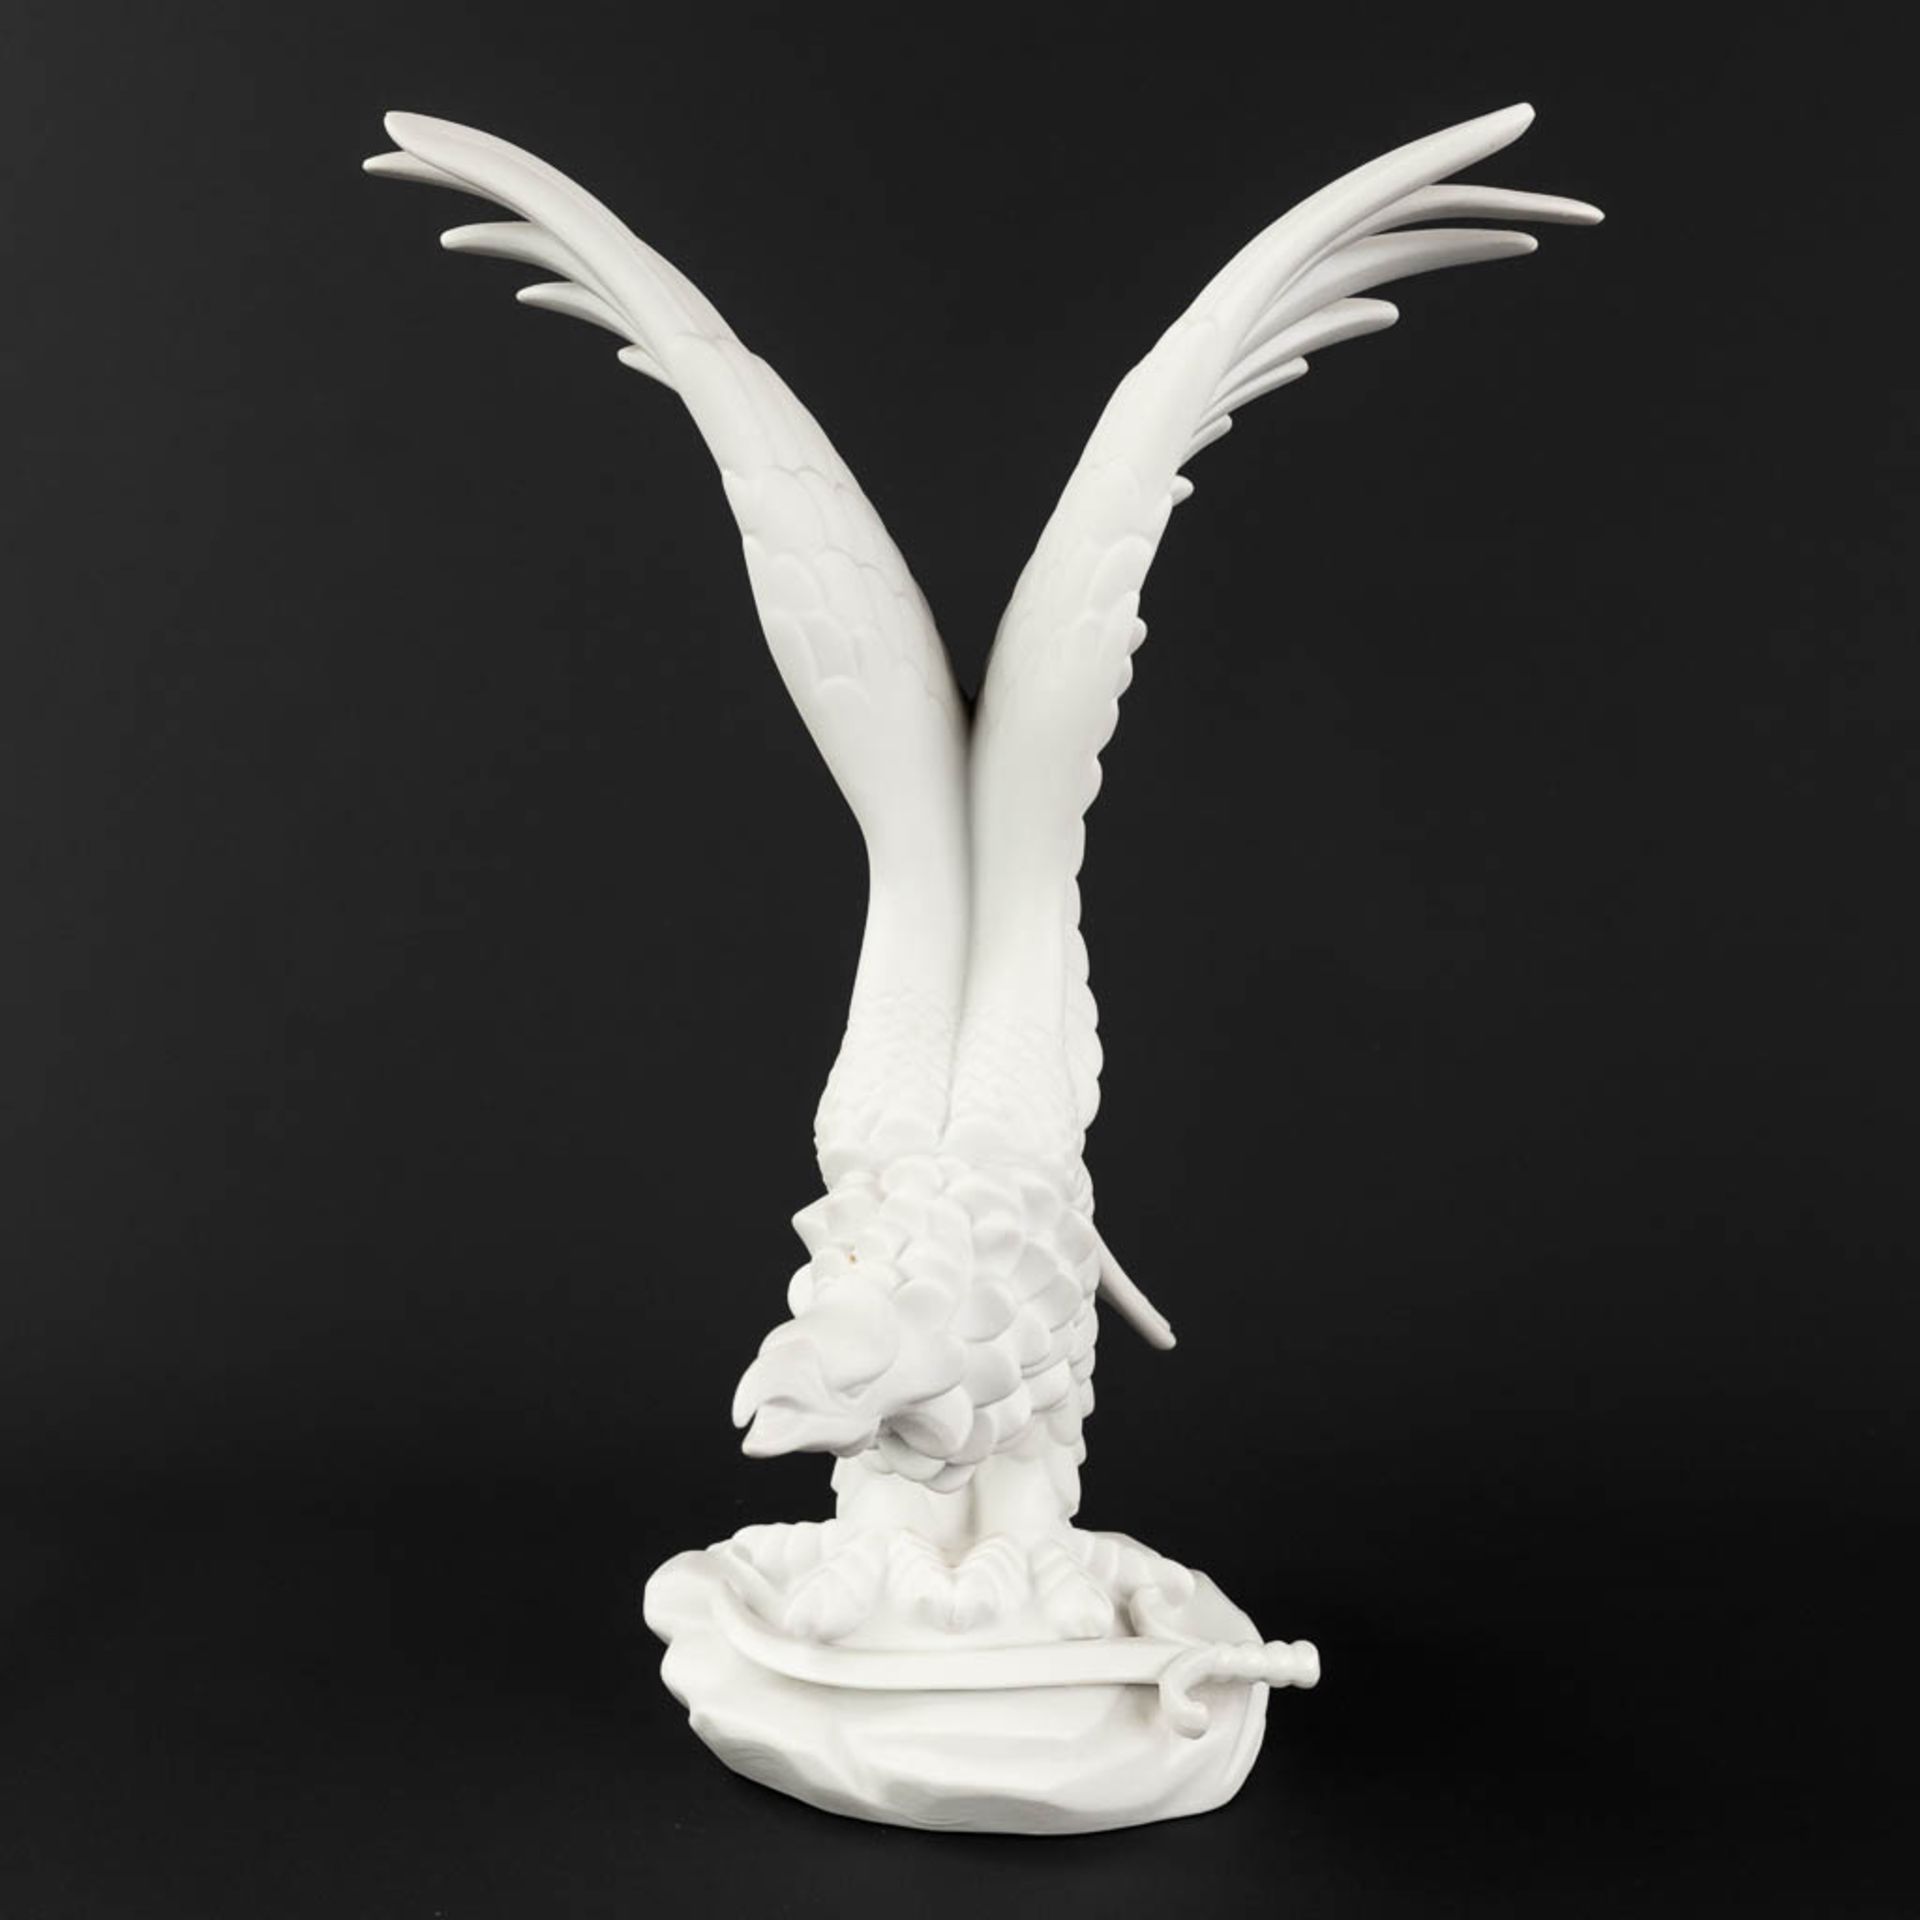 Herend, an eagle with sword figurine, bisque porcelain. (D:24 x W:23,5 x H:33 cm) - Image 3 of 10